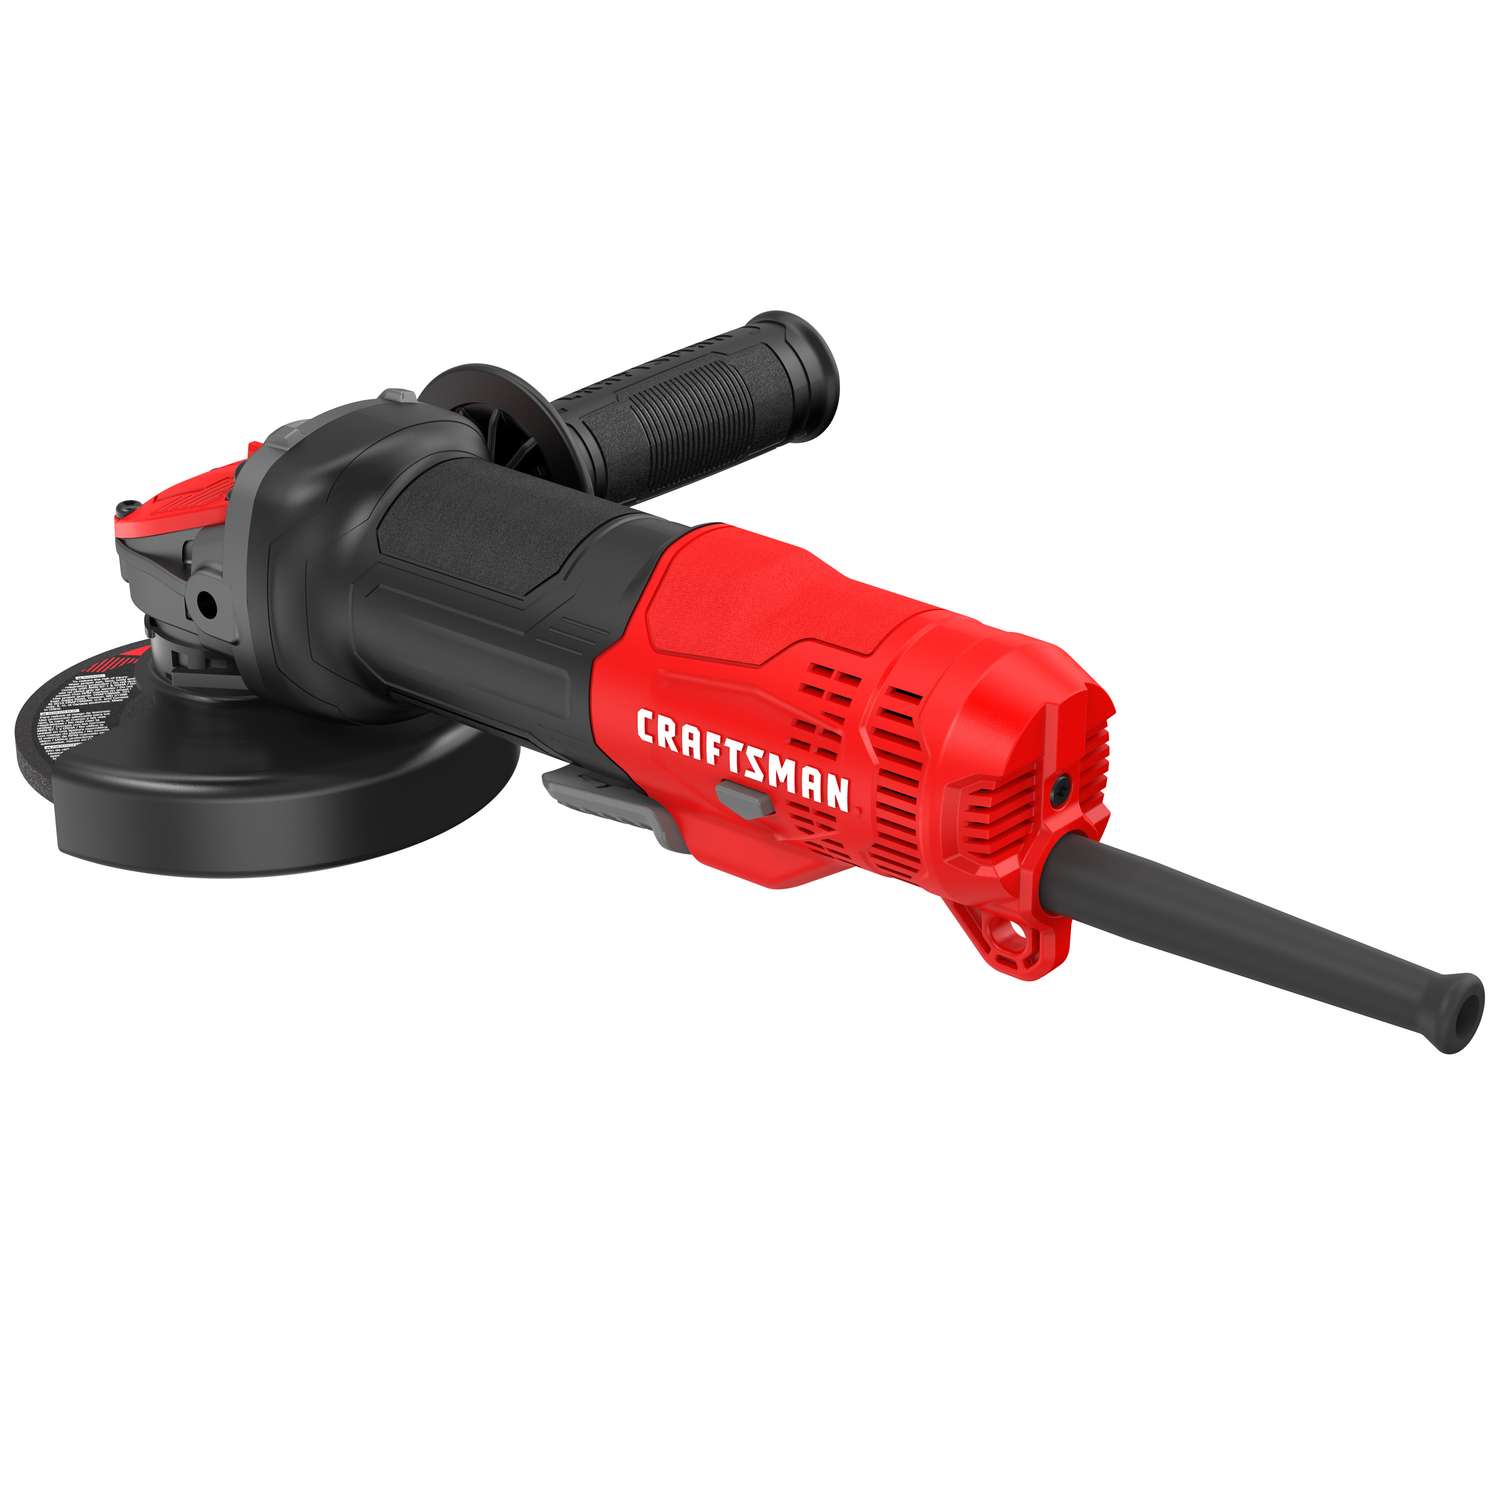 Craftsman Corded 7 5 amps 4 1 2 in Small Angle Grinder  